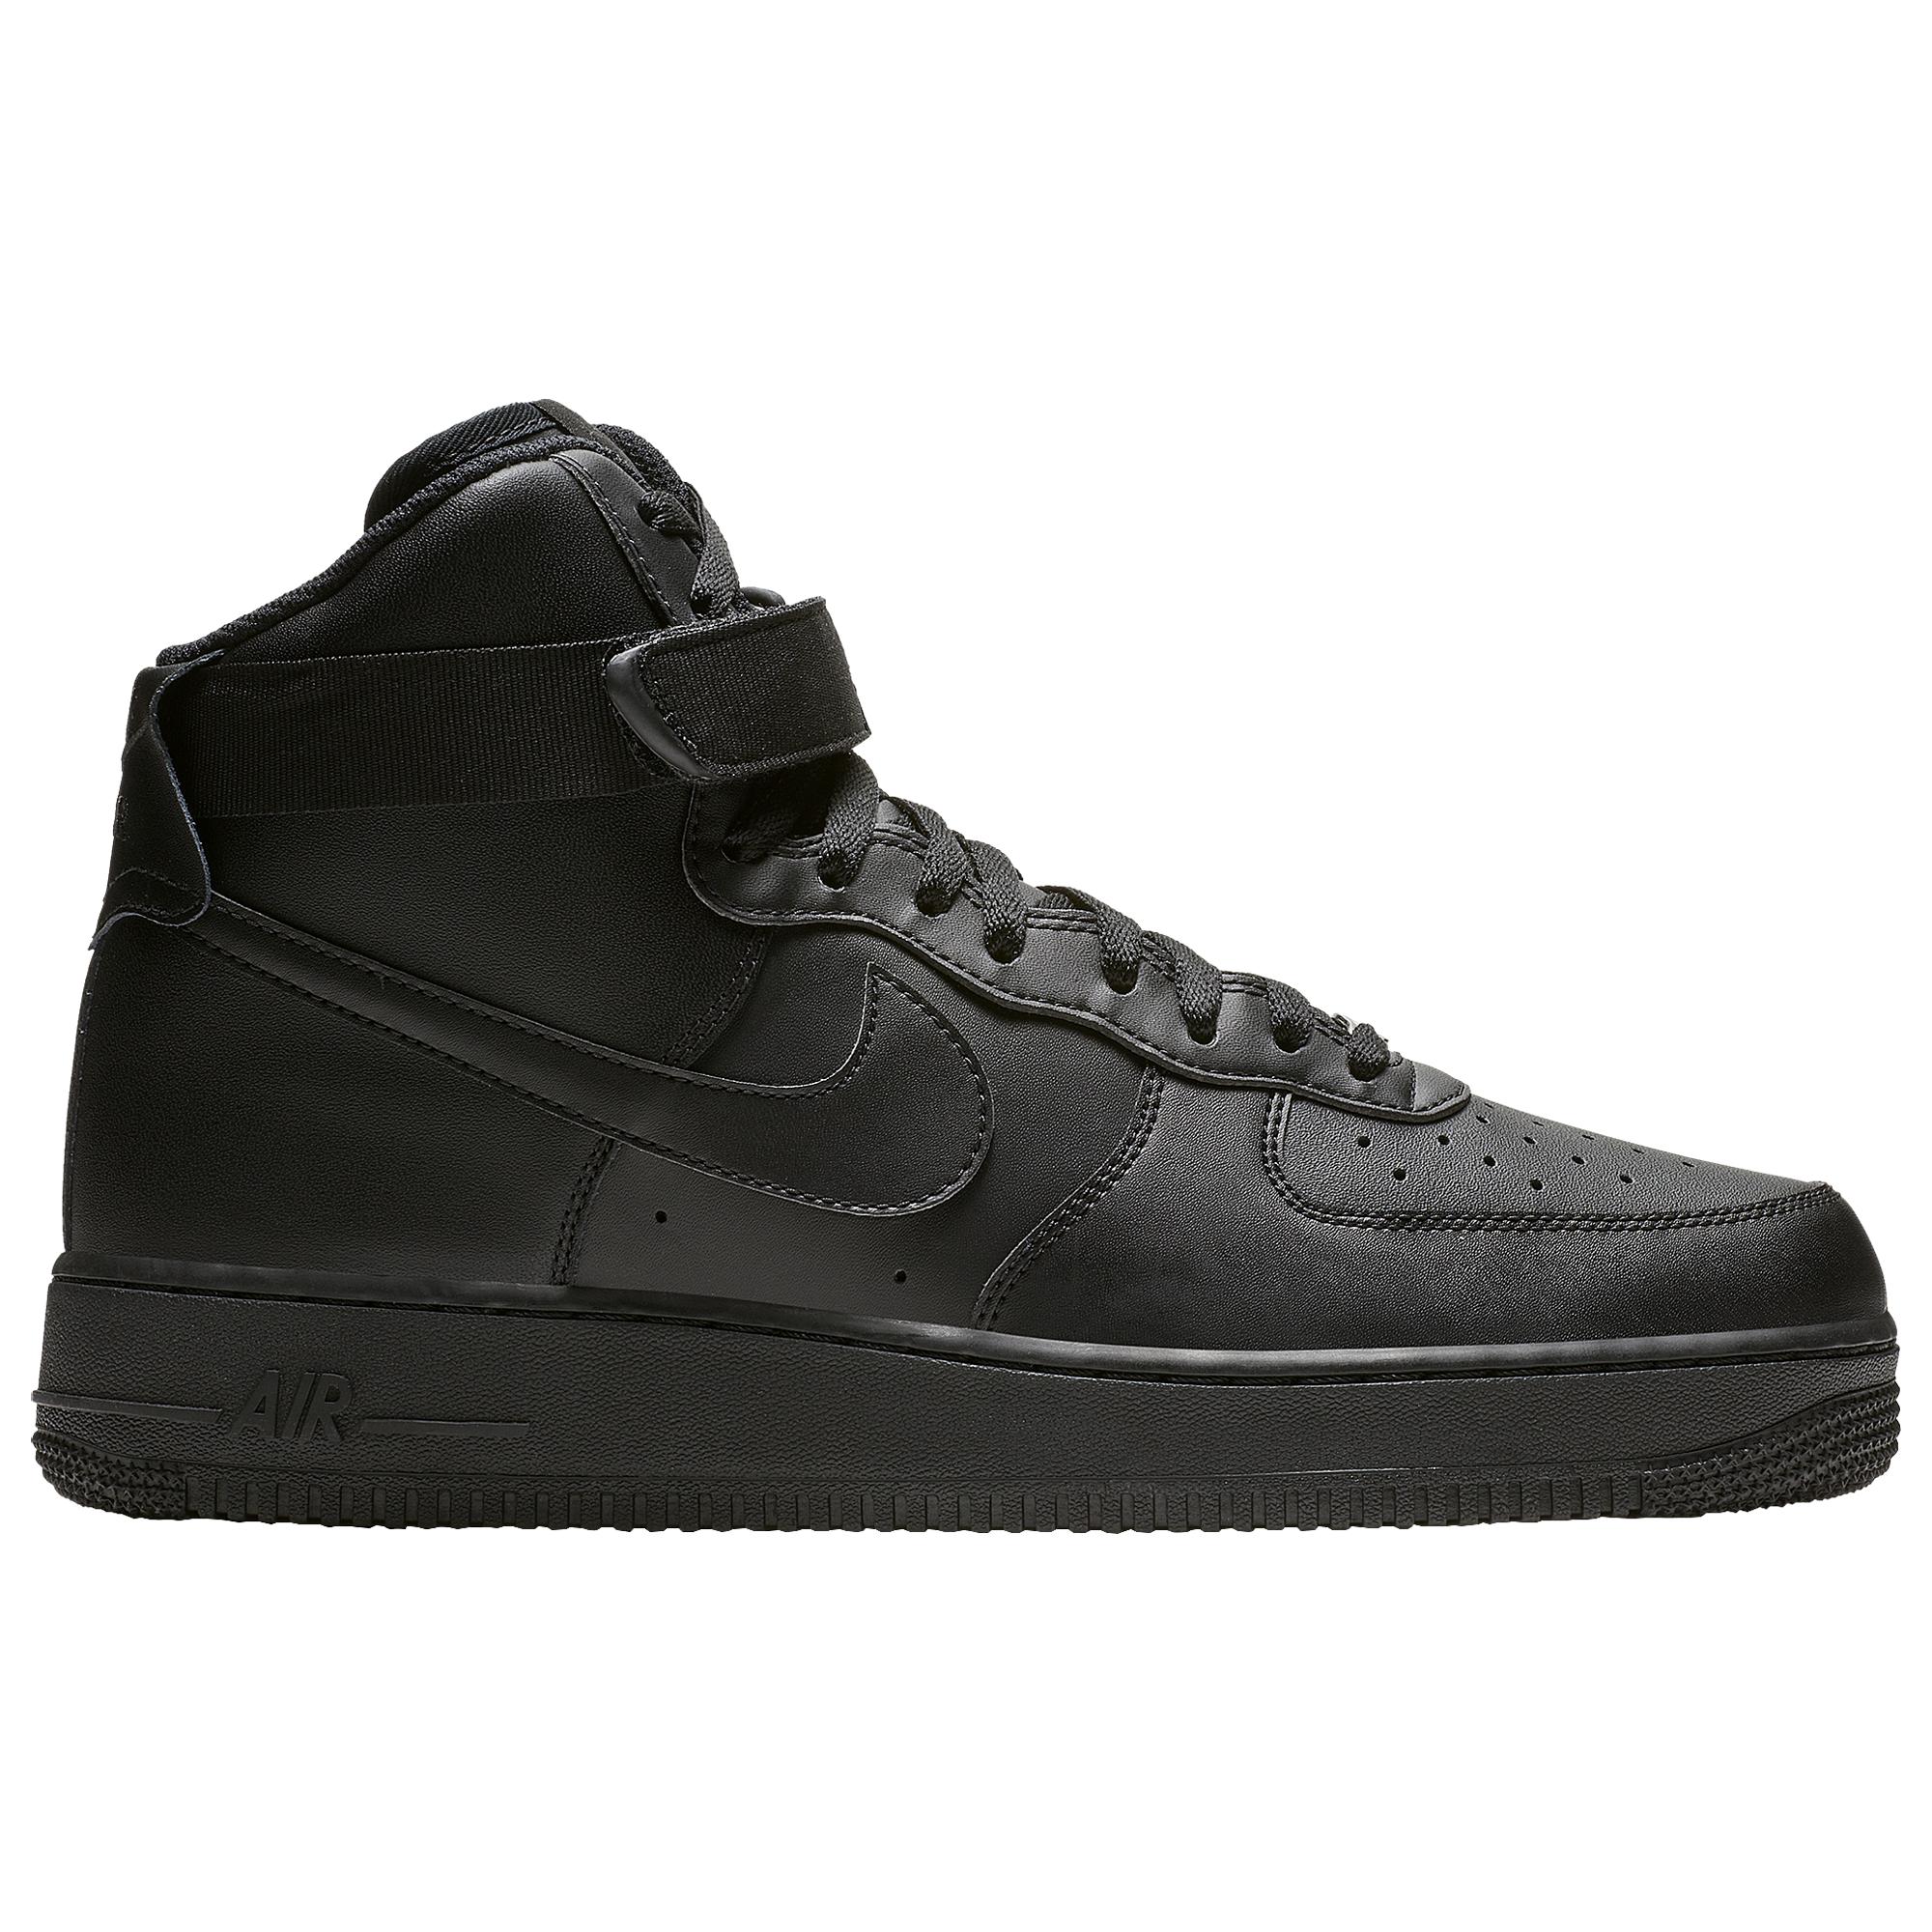 Nike Leather Air Force 1 High Basketball Shoes in Black/Black/Black ...